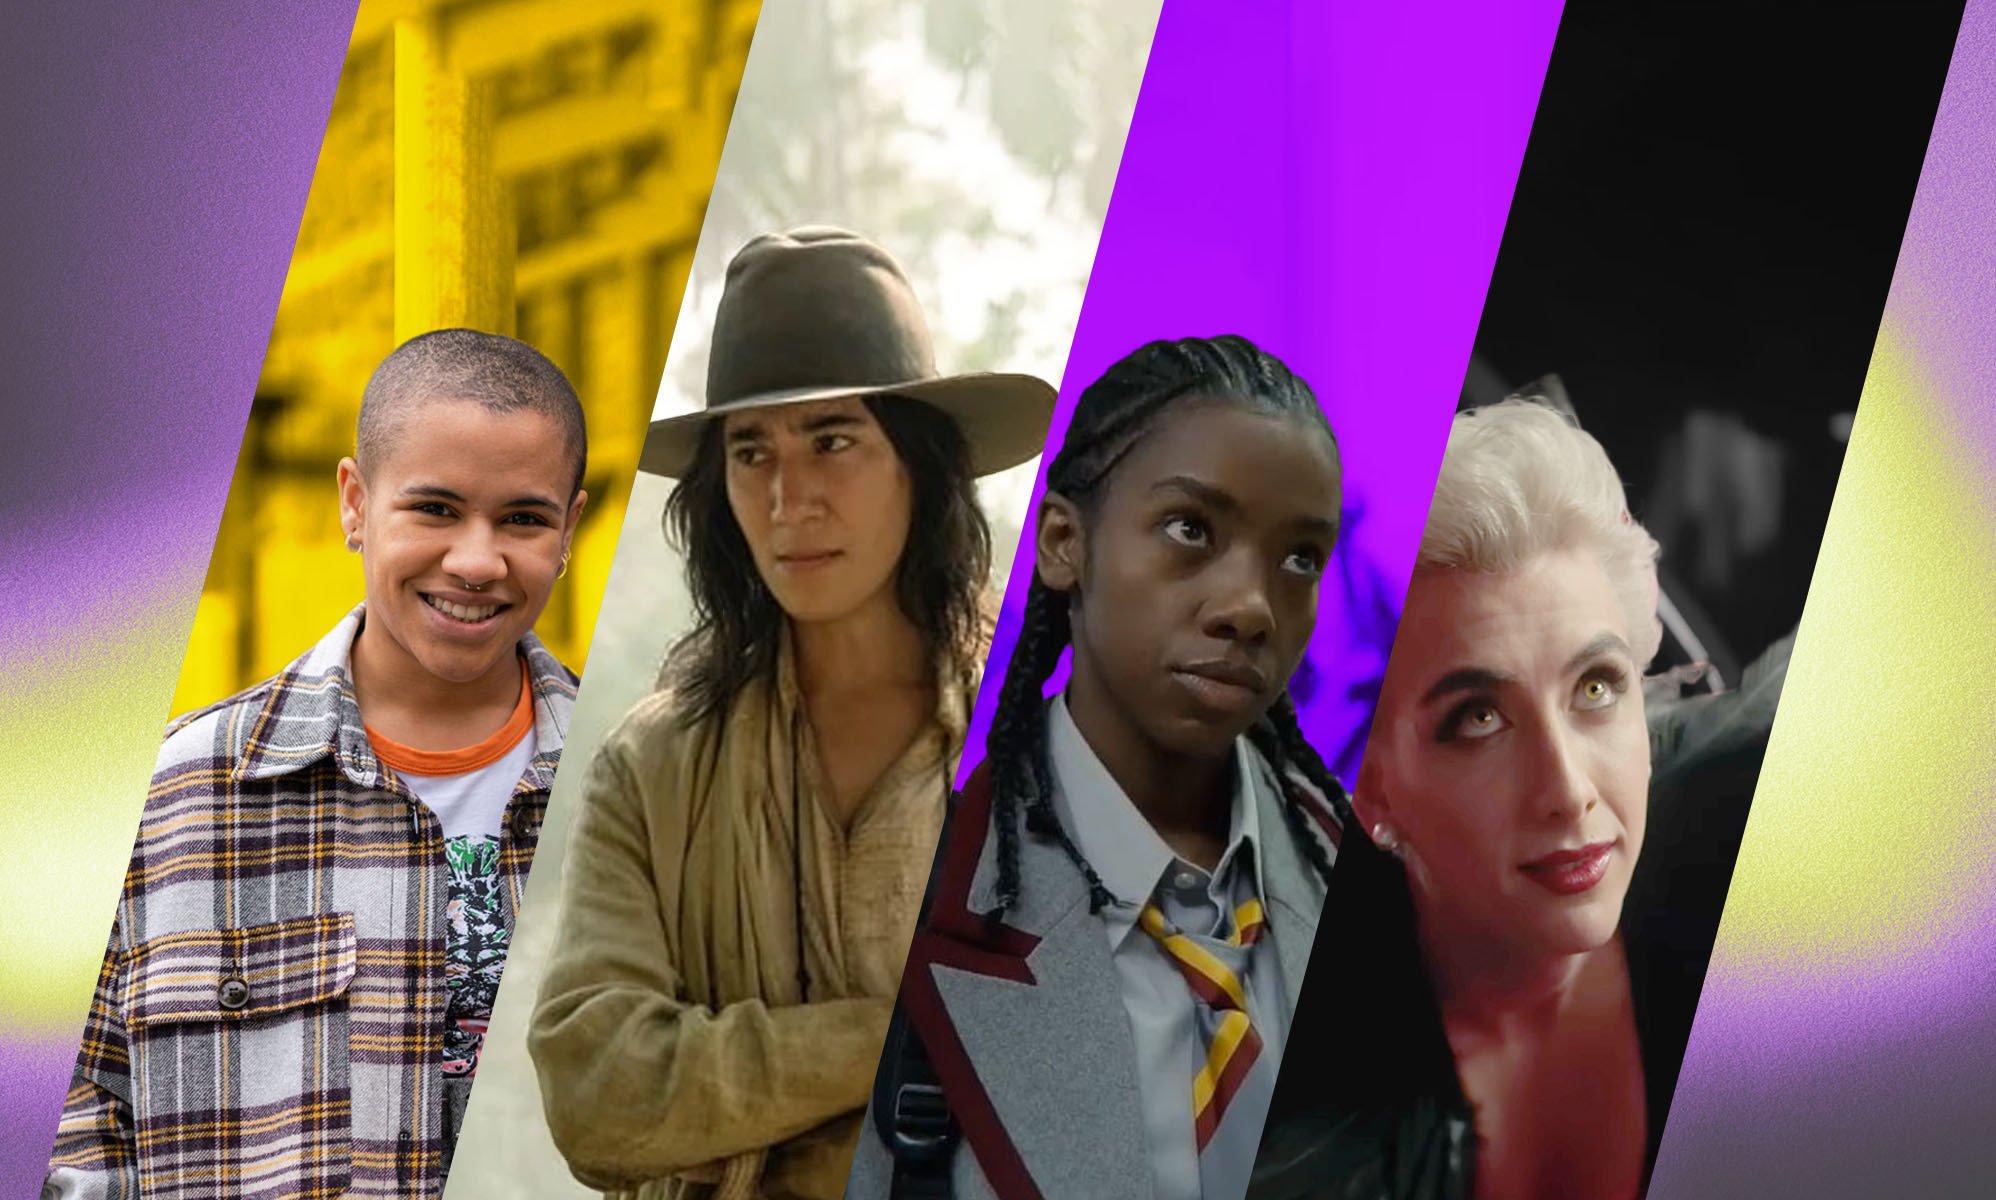 10 TV shows with non-binary characters that are doing representation right